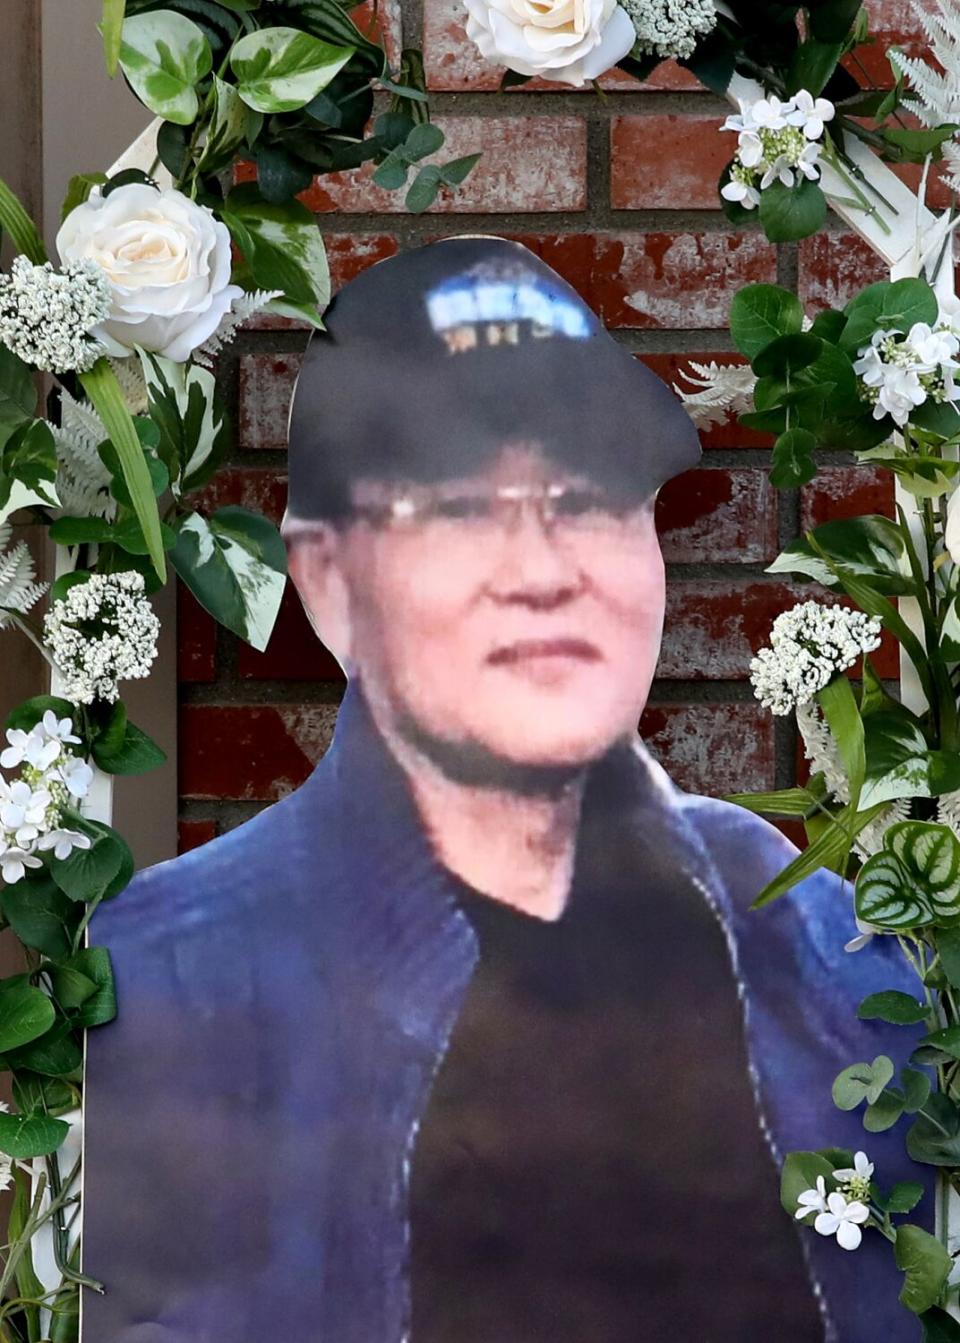 A cutout paper portrait of a man in a cap, blue sweater and wearing glasses, surrounded by a wreath of flowers